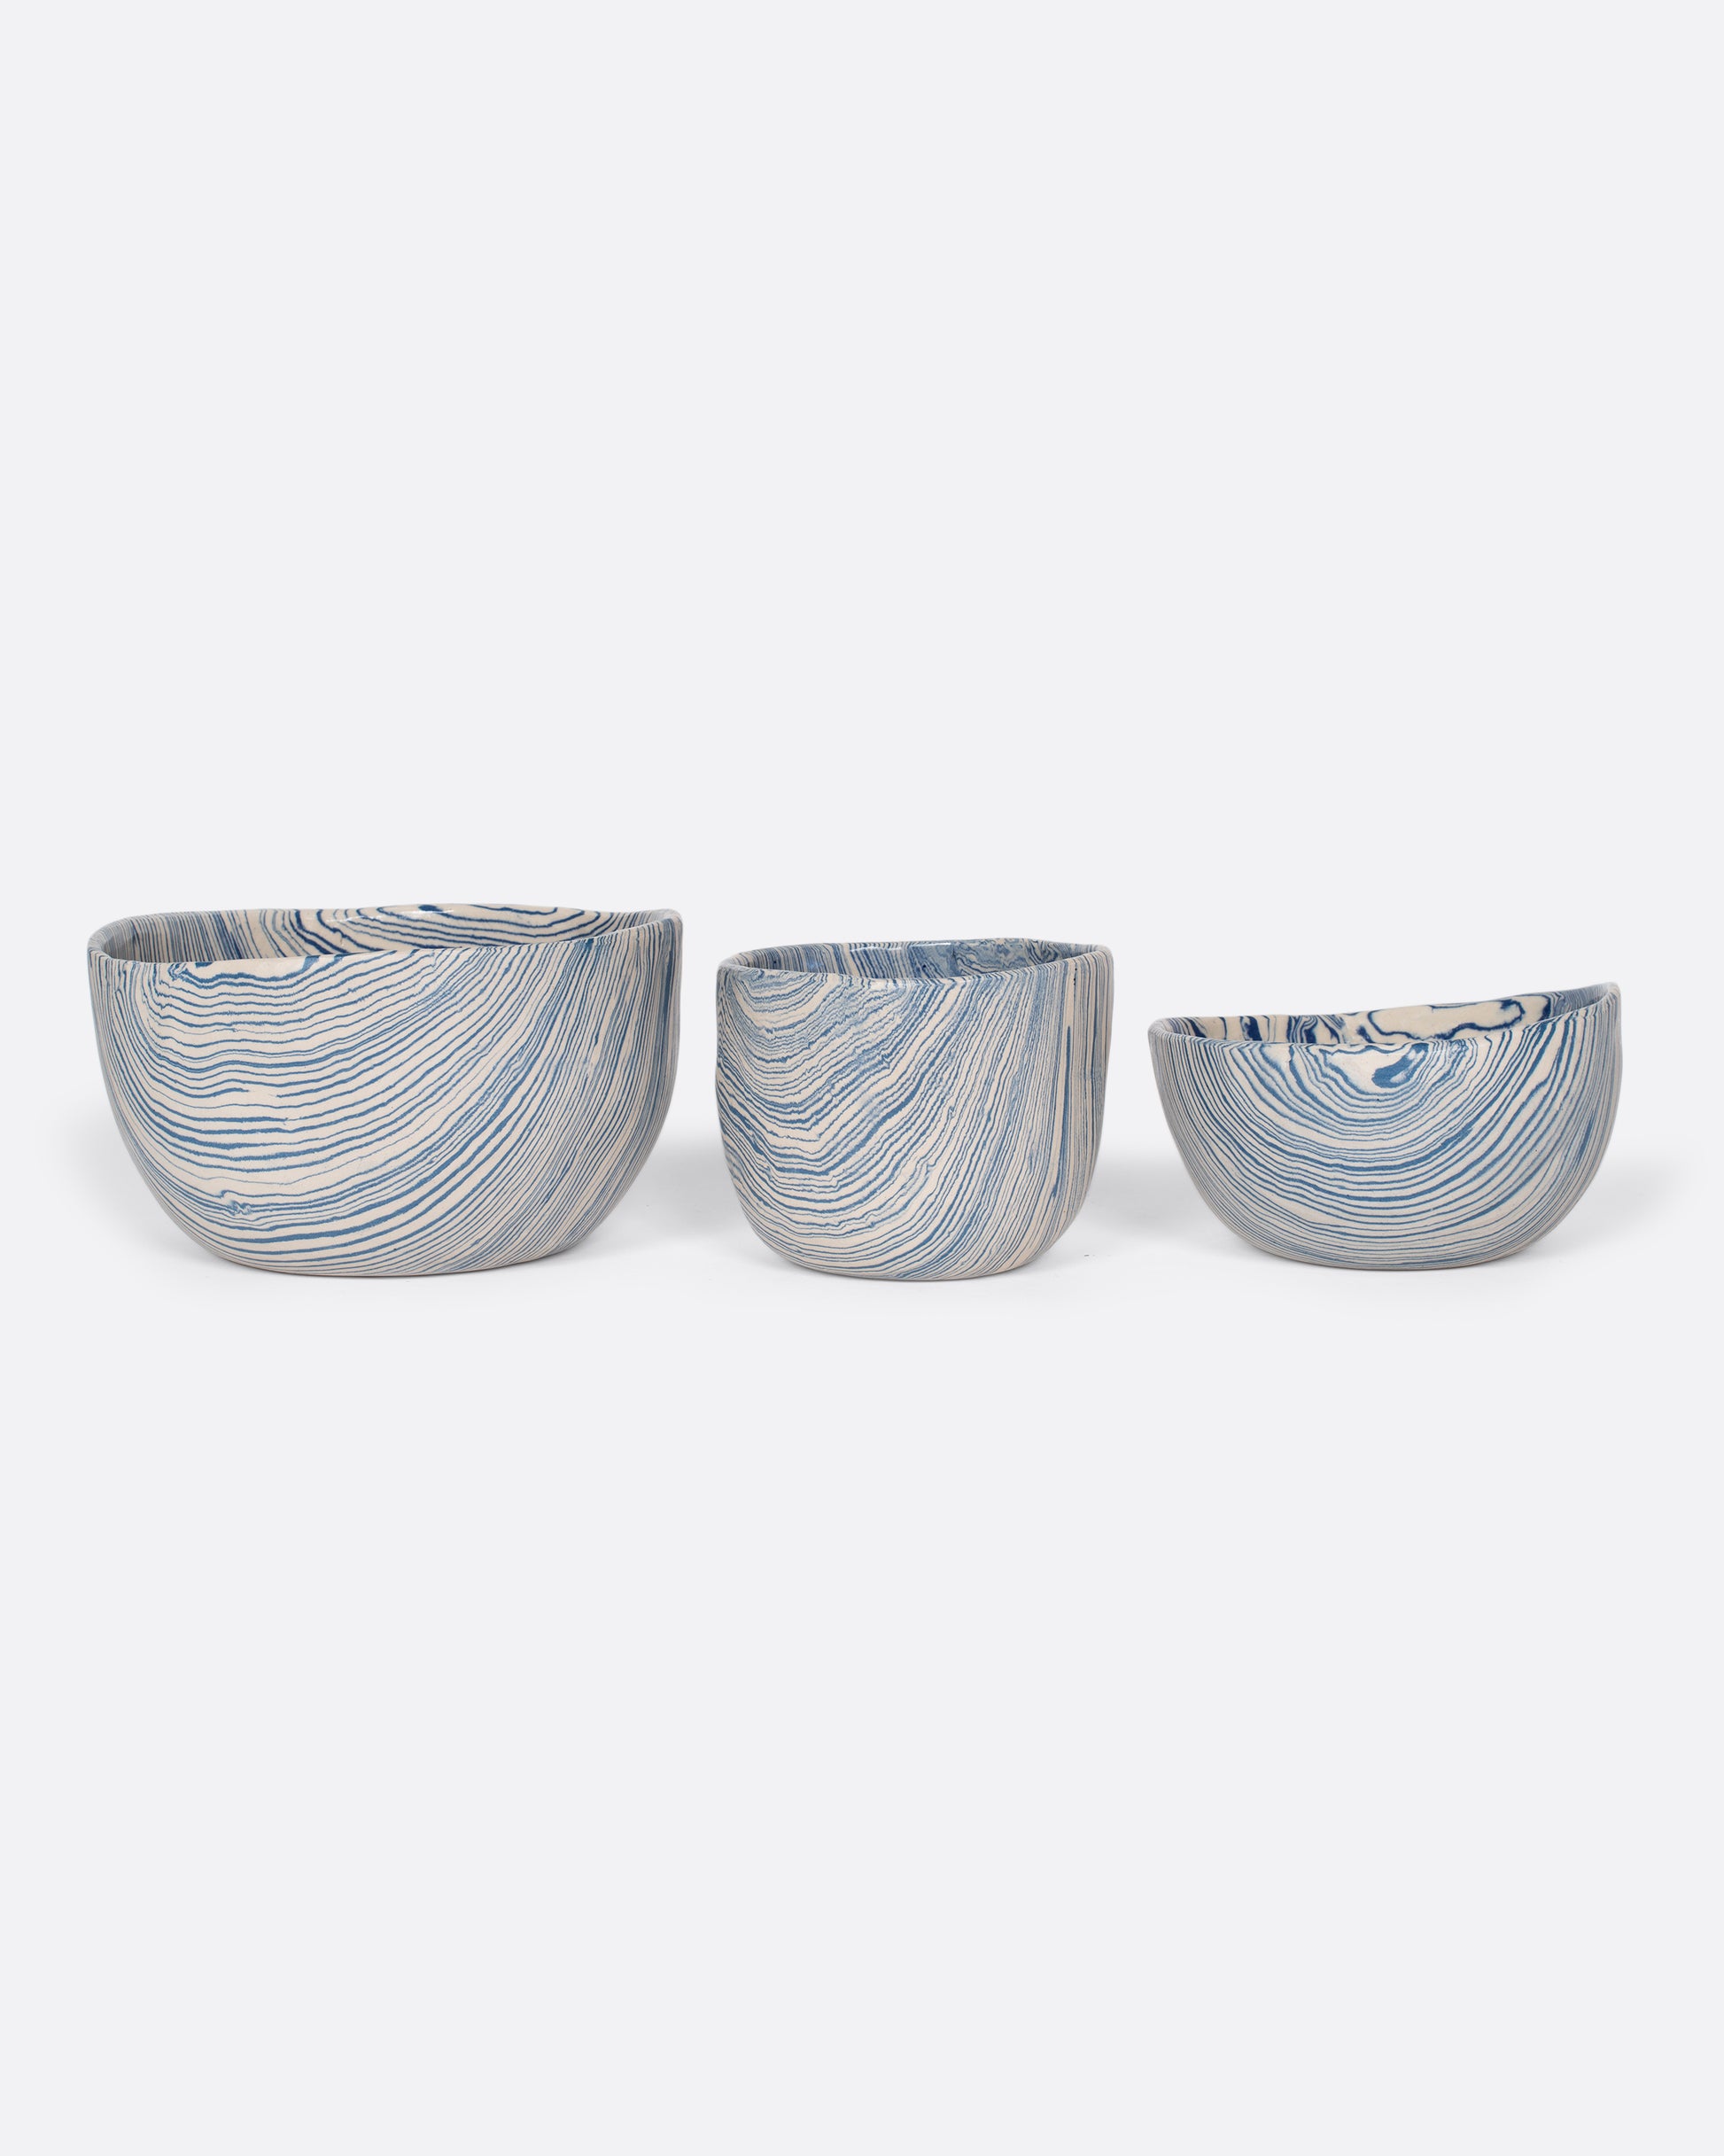 These small batch ceramic bowls look plucked straight from the ocean, with flowing hues of blue and white. They're made with a traditional Japanese Nerikomi technique that creates an intricate, marbled design by layering and compressing clay. Available in small, medium, and large sizes.